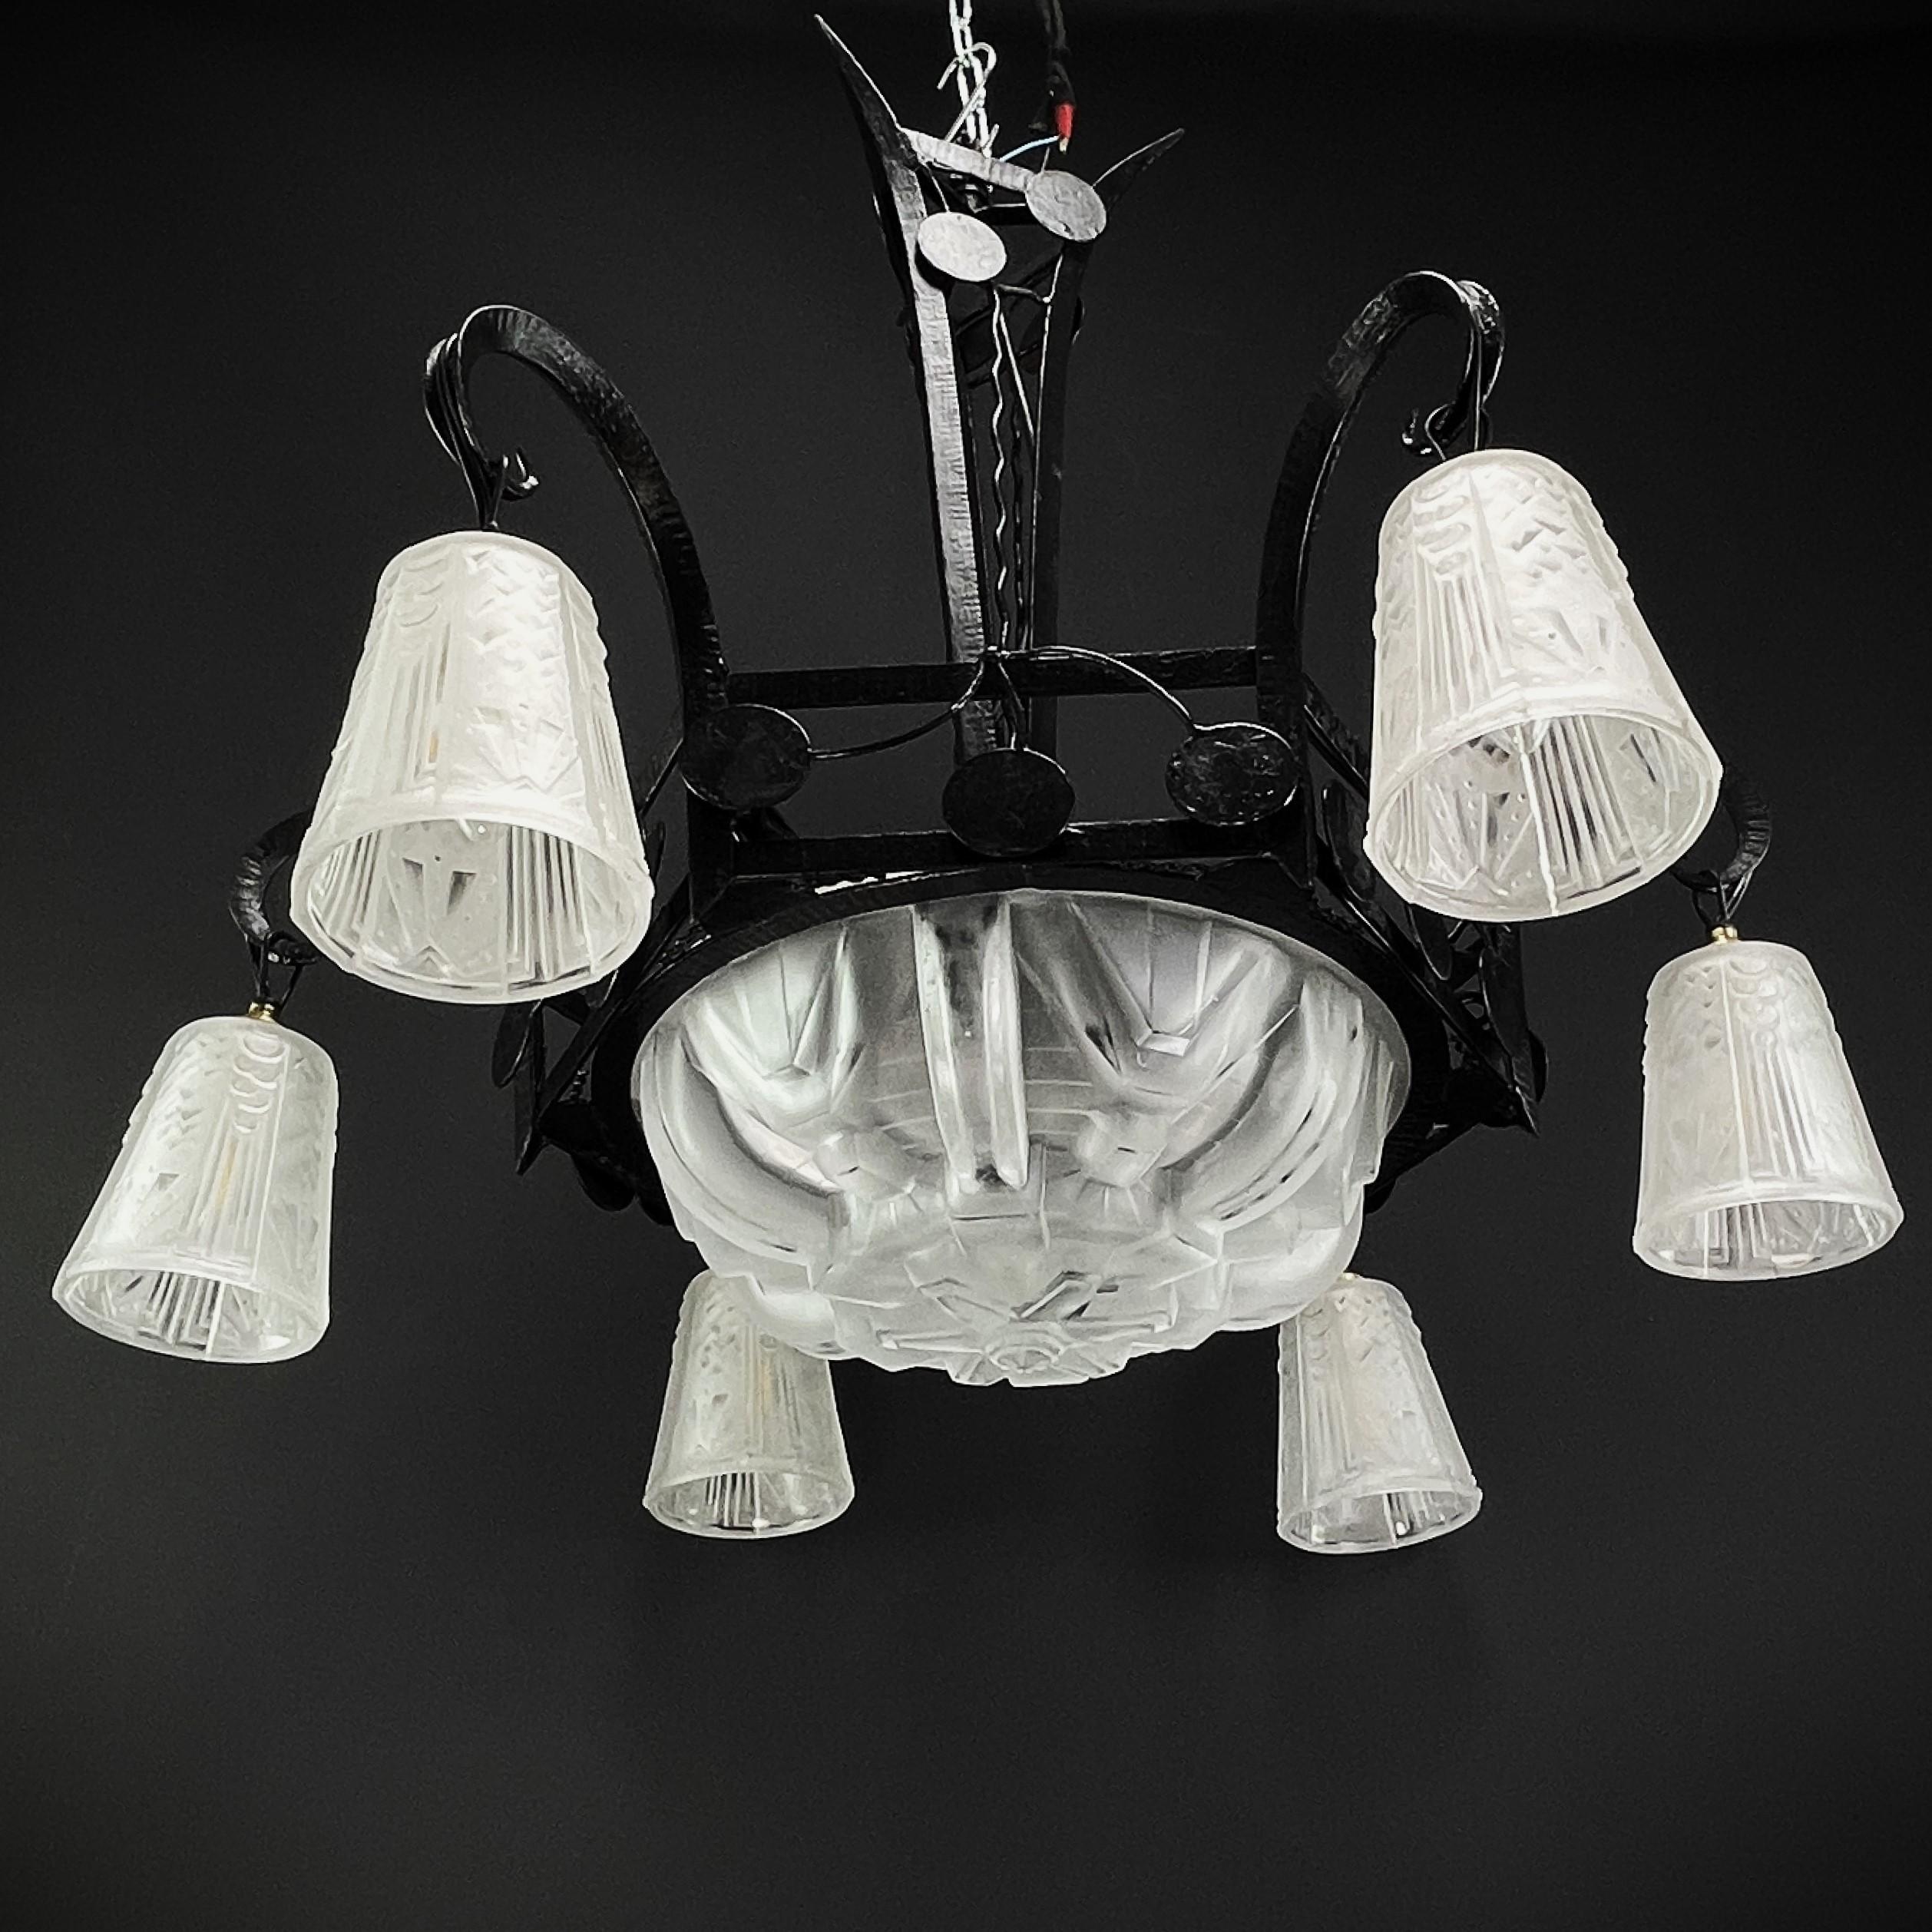 art deco ceiling lamp by  Muller Frères Lunéville

The Muller Frères Lunéville ART DECO ceiling lamp is a fascinating example of the masterful craftsmanship and exquisite design of this renowned French glass manufacturer. This signed ceiling lamp